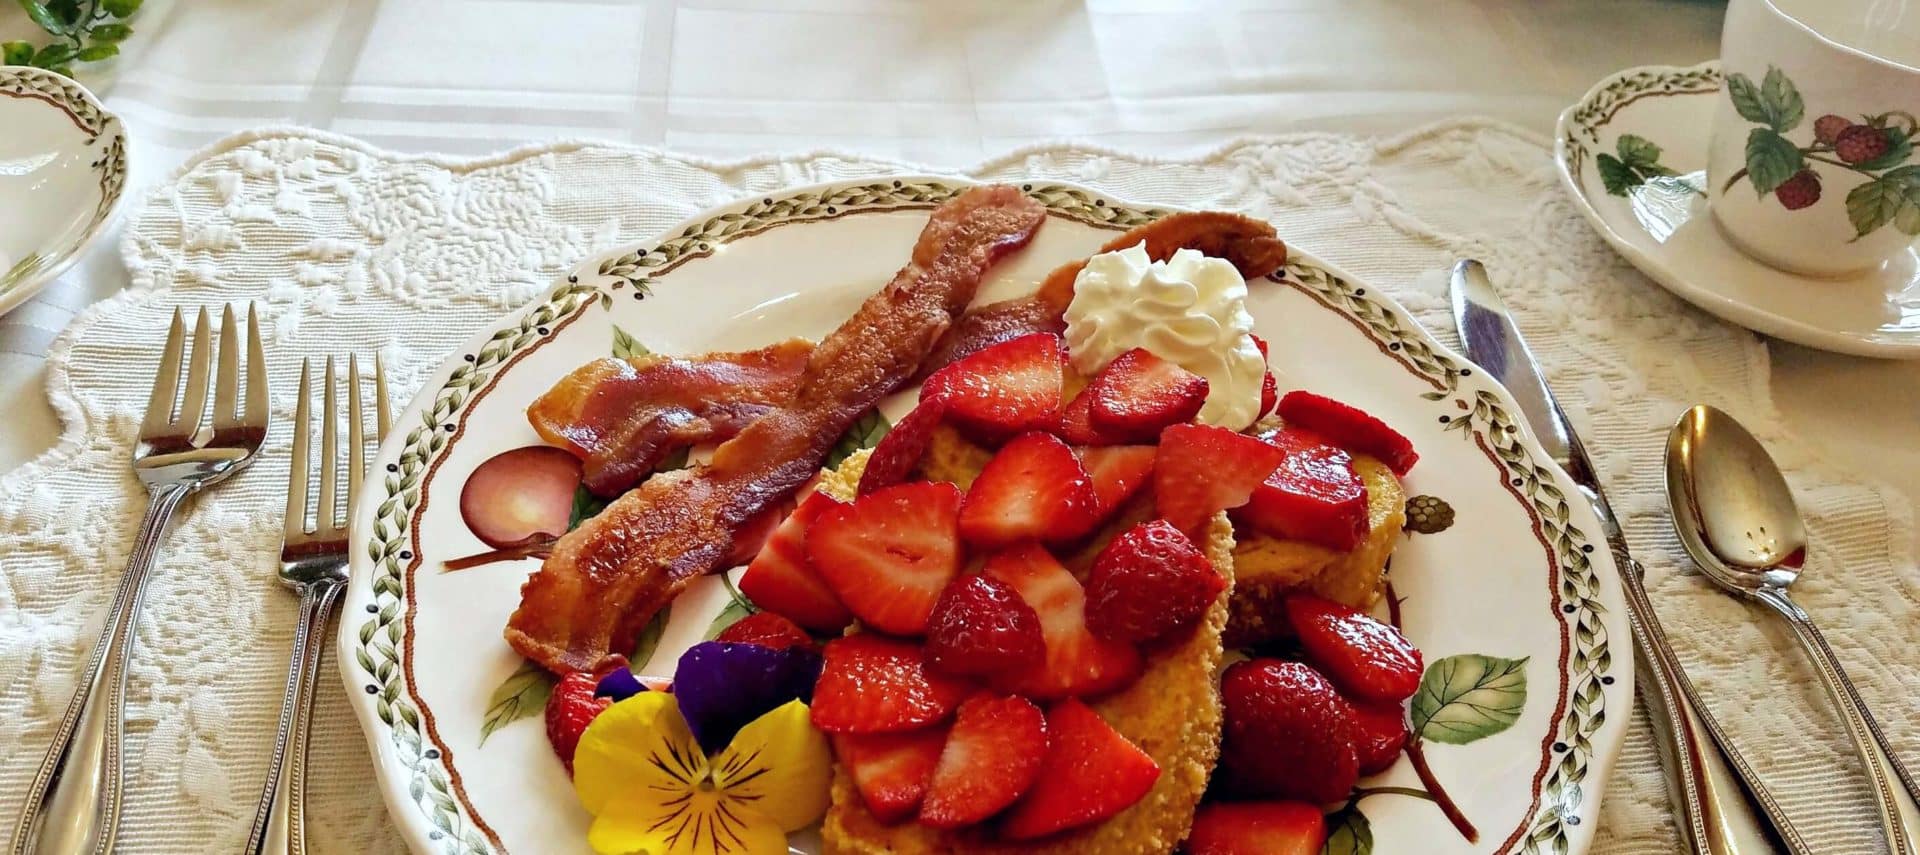 Lemonade French Toast covered in strawberries at a set table with fine china setting